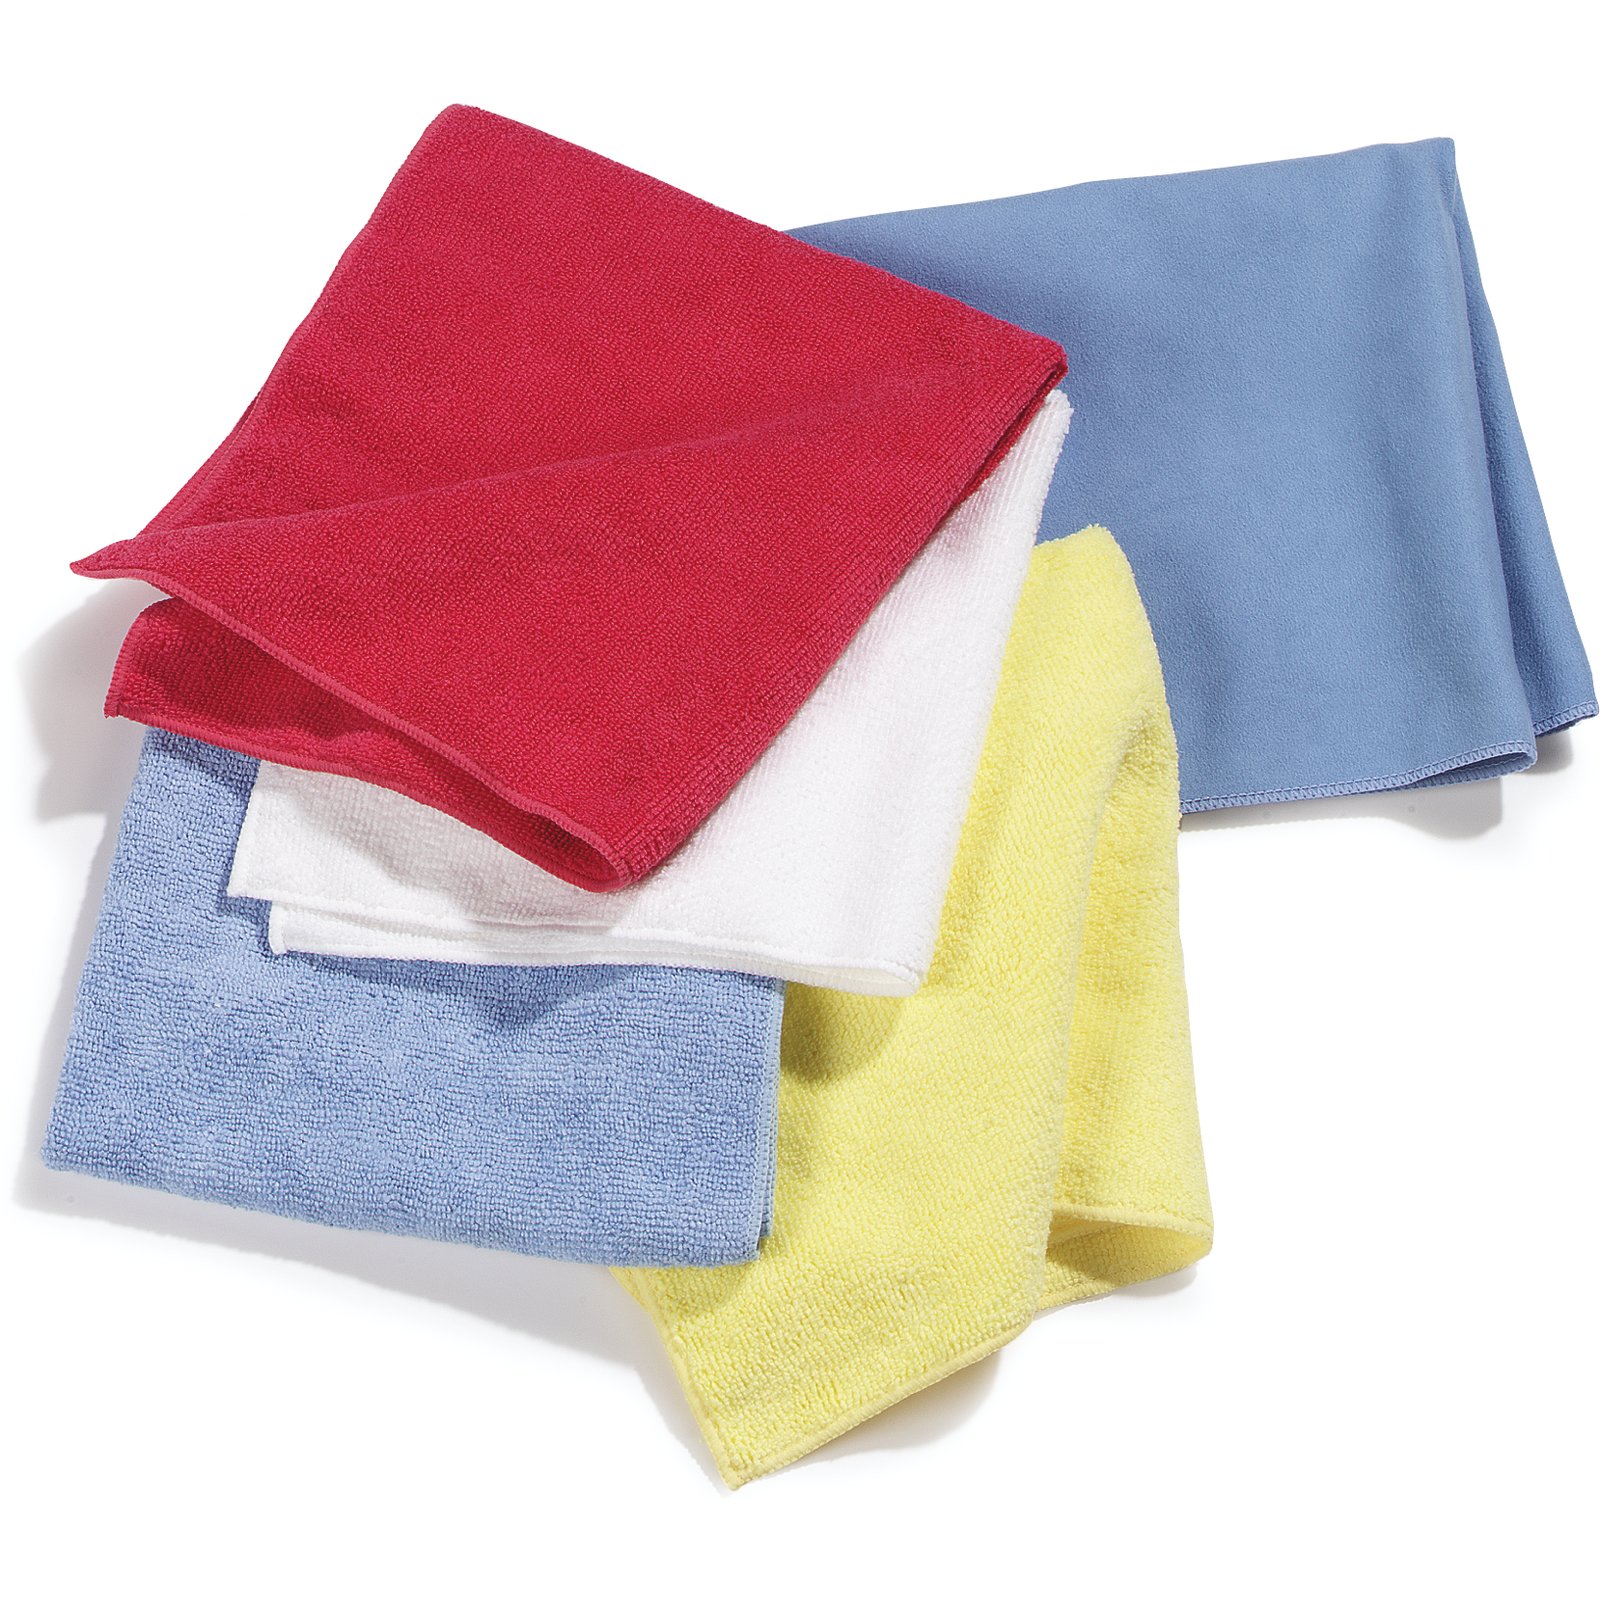 3633402 - Terry Microfiber Cleaning Cloth 16 x 16 - White